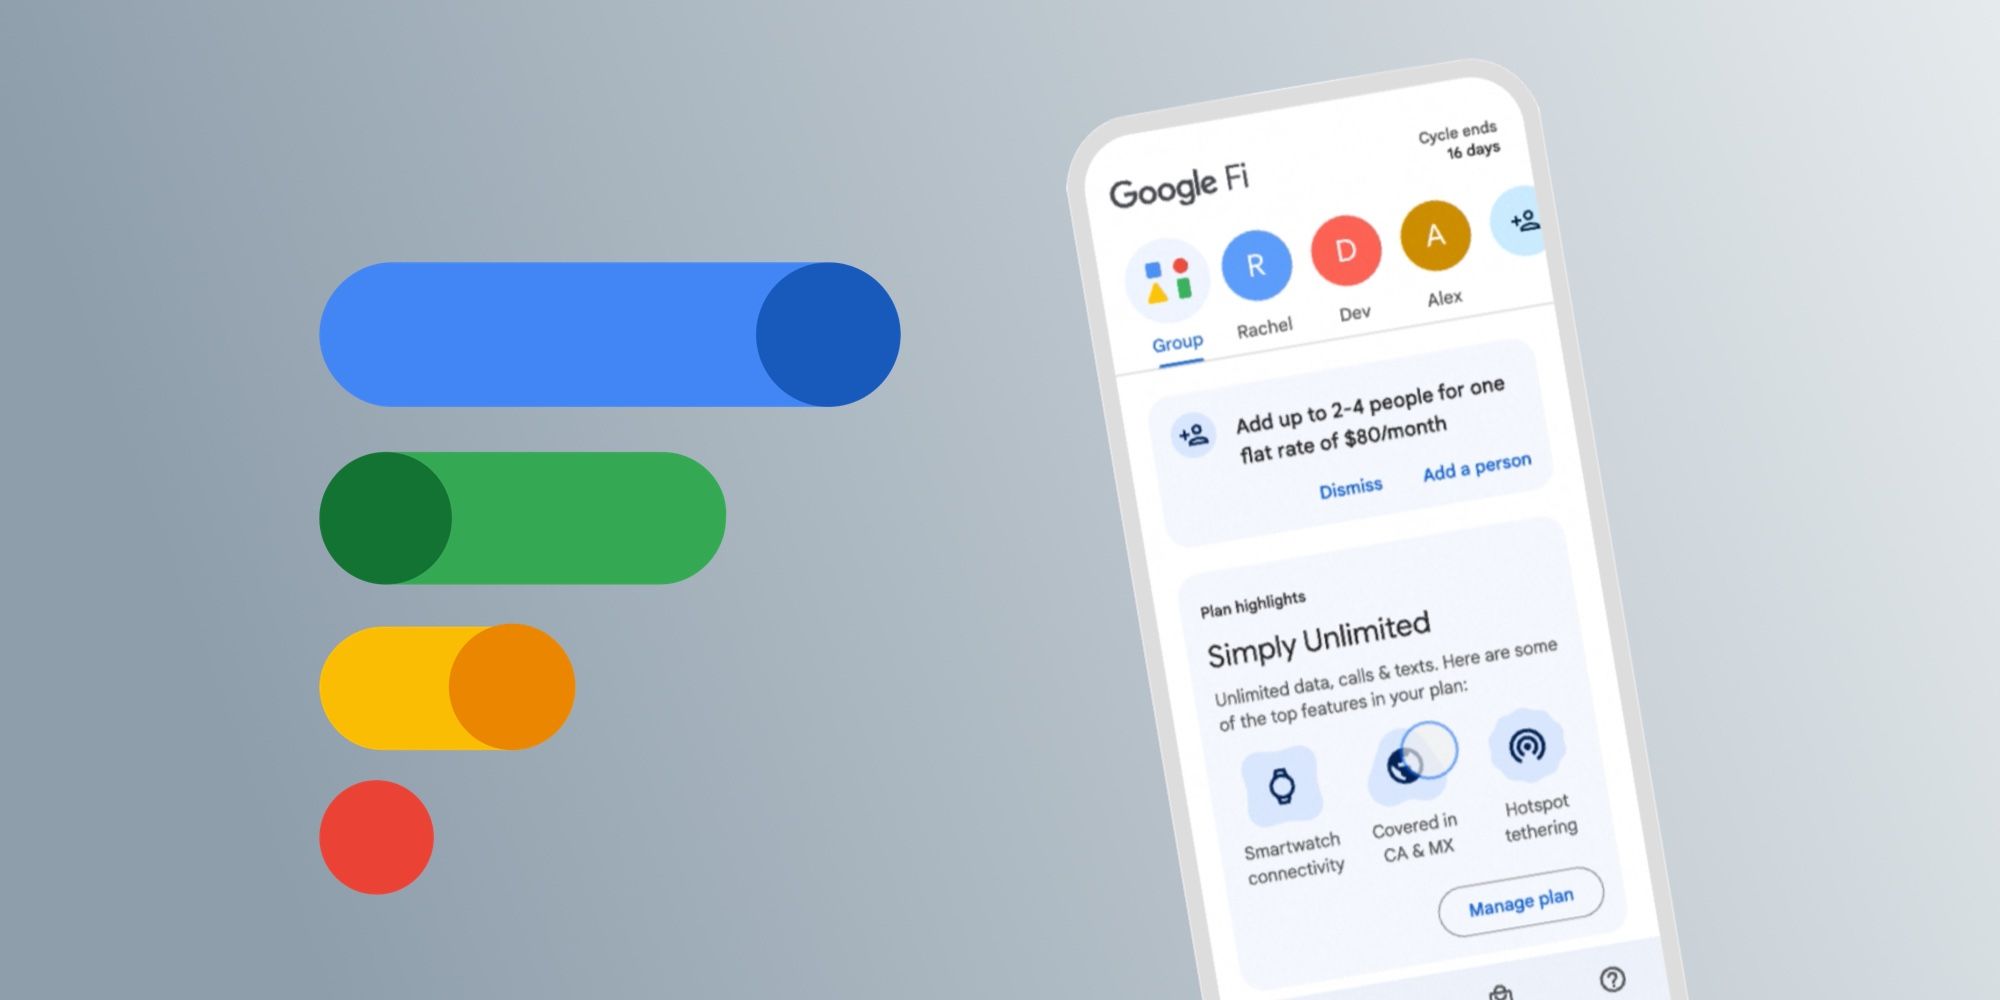 Google Fi Simply Unlimited plan on a phone with Google Fi logo